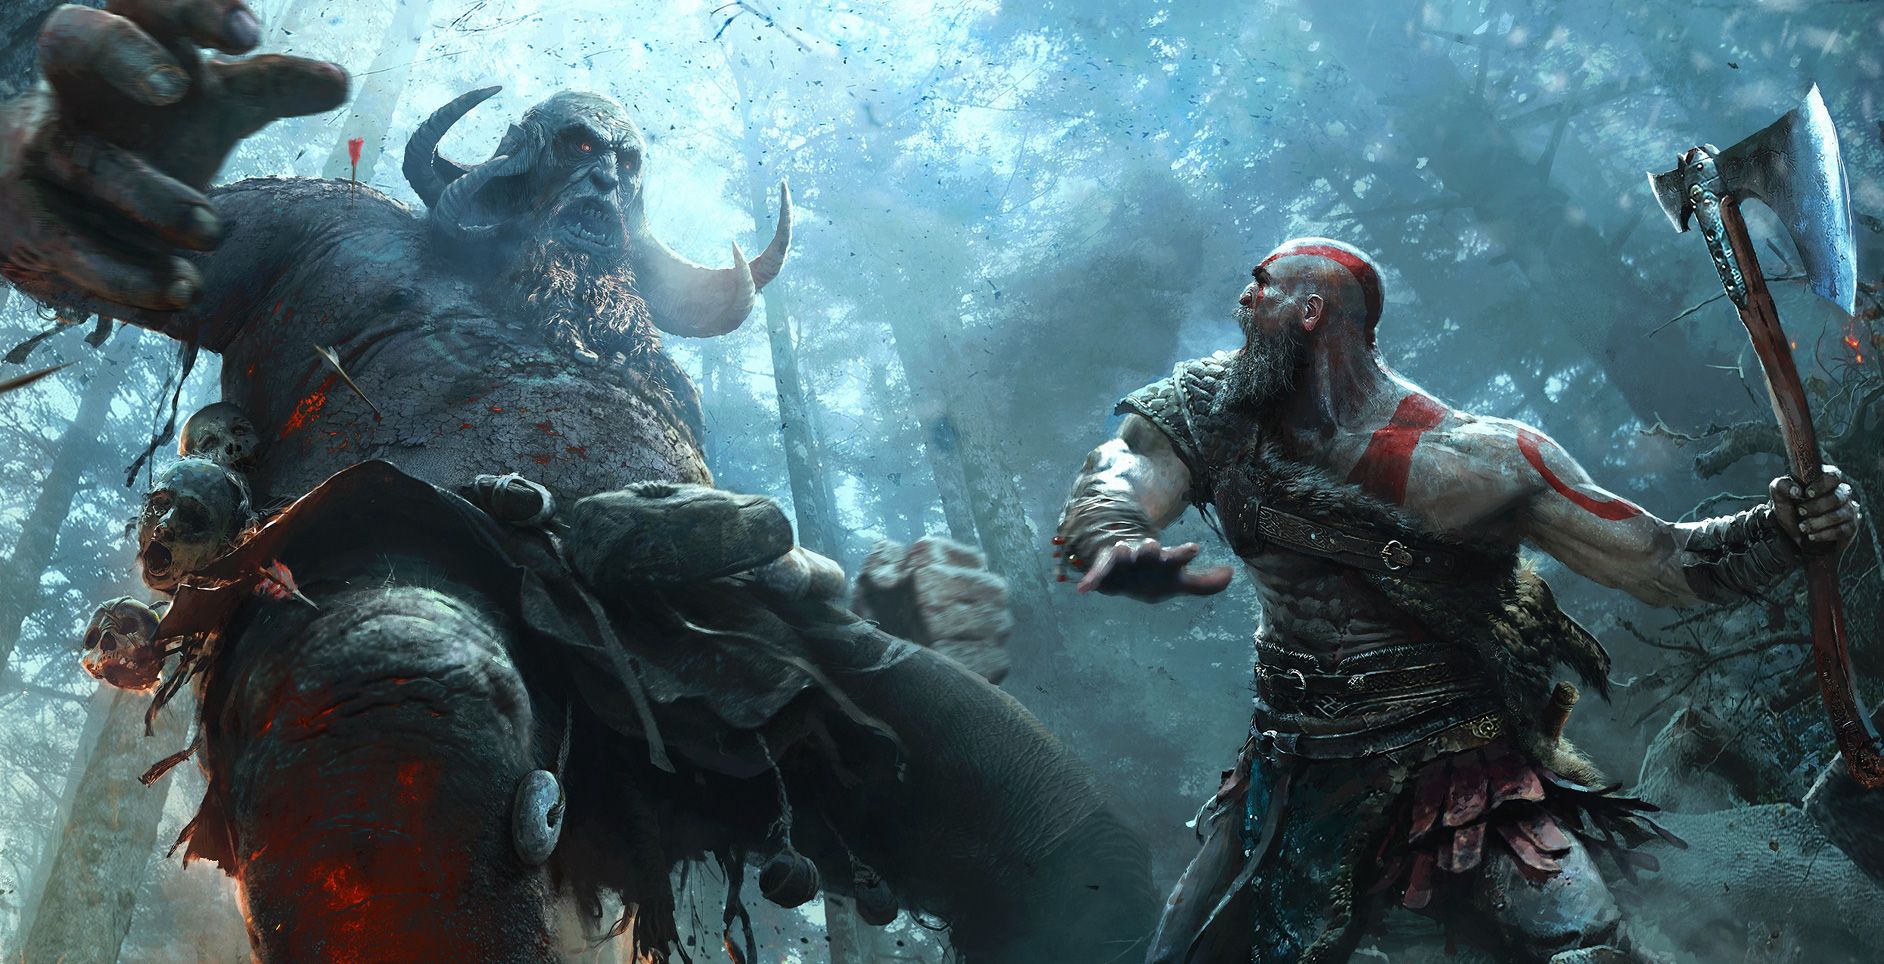 God of War reviews are out - is it any good?